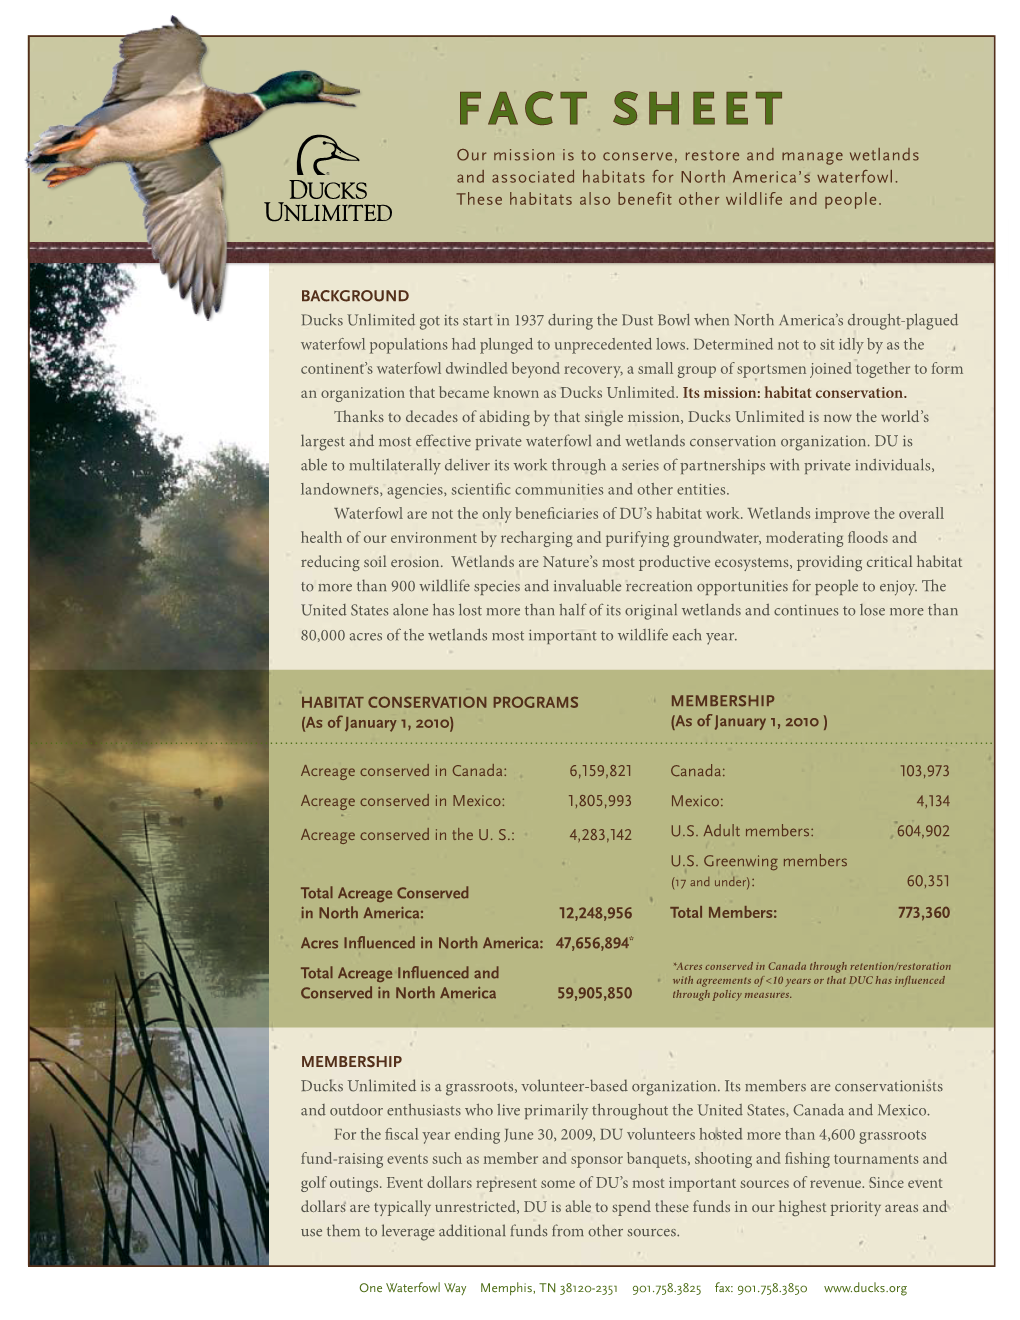 Fact Sheet Our Mission Is to Conserve, Restore and Manage Wetlands and Associated Habitats for North America’S Waterfowl